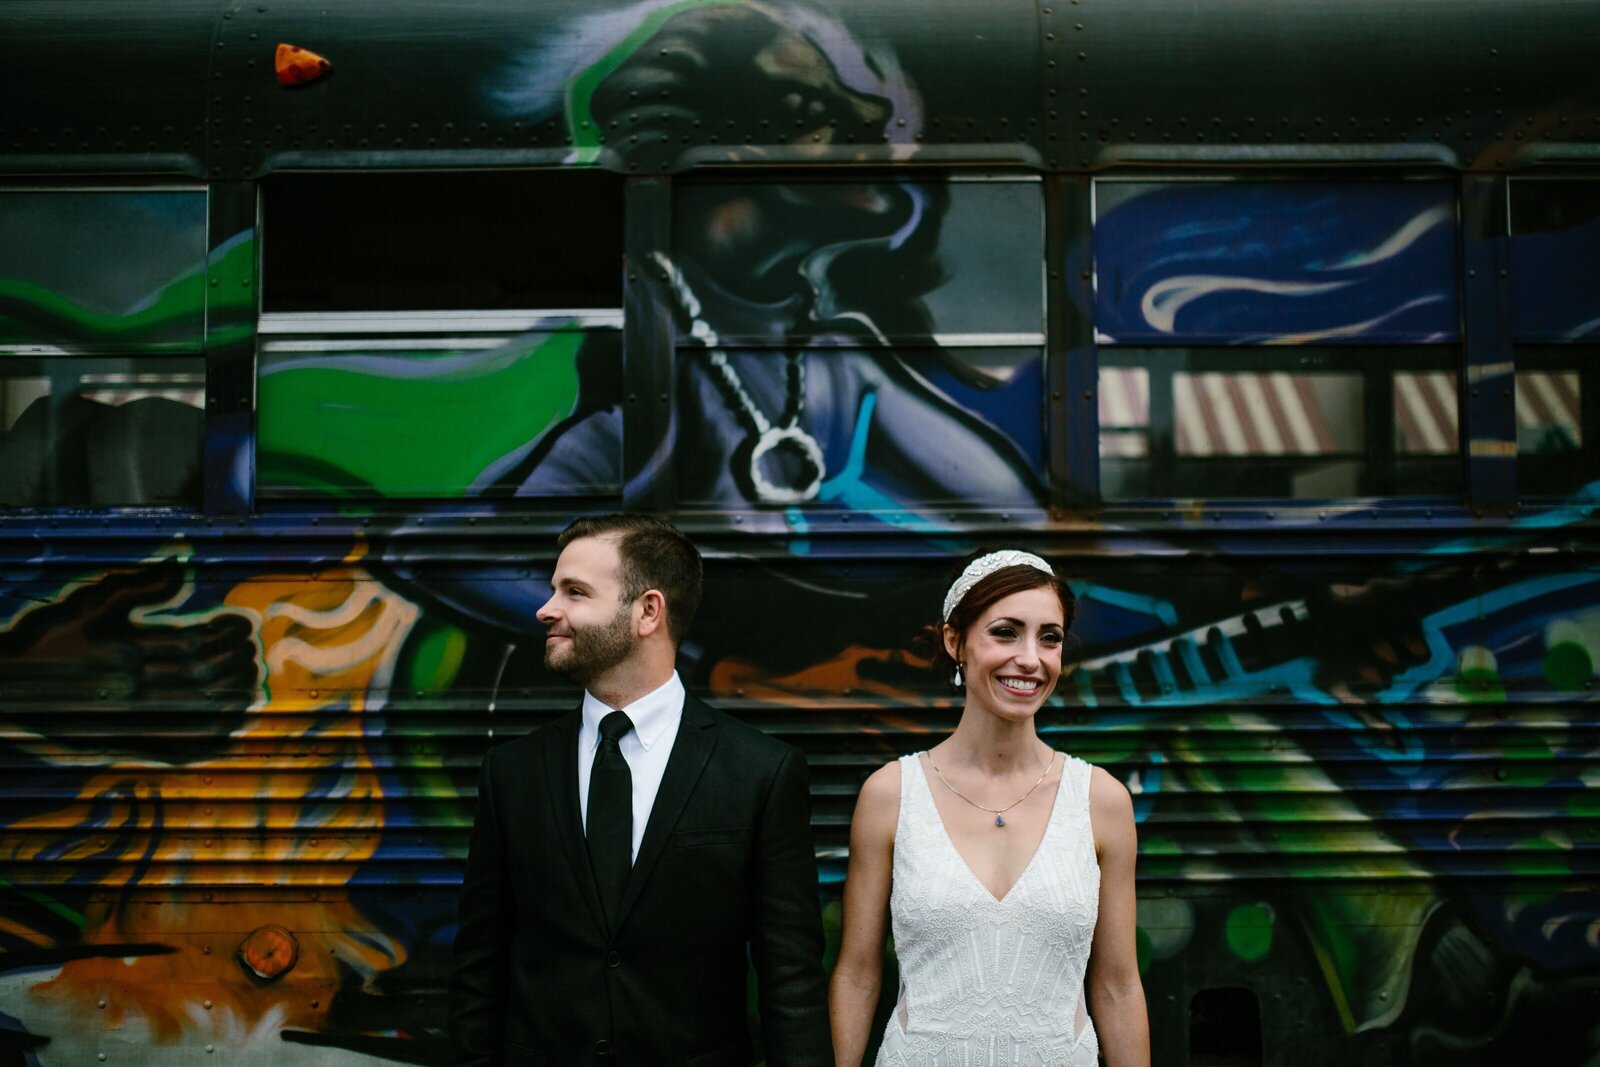 Bride and groom pose for portrait in front of bus covered in graffiti